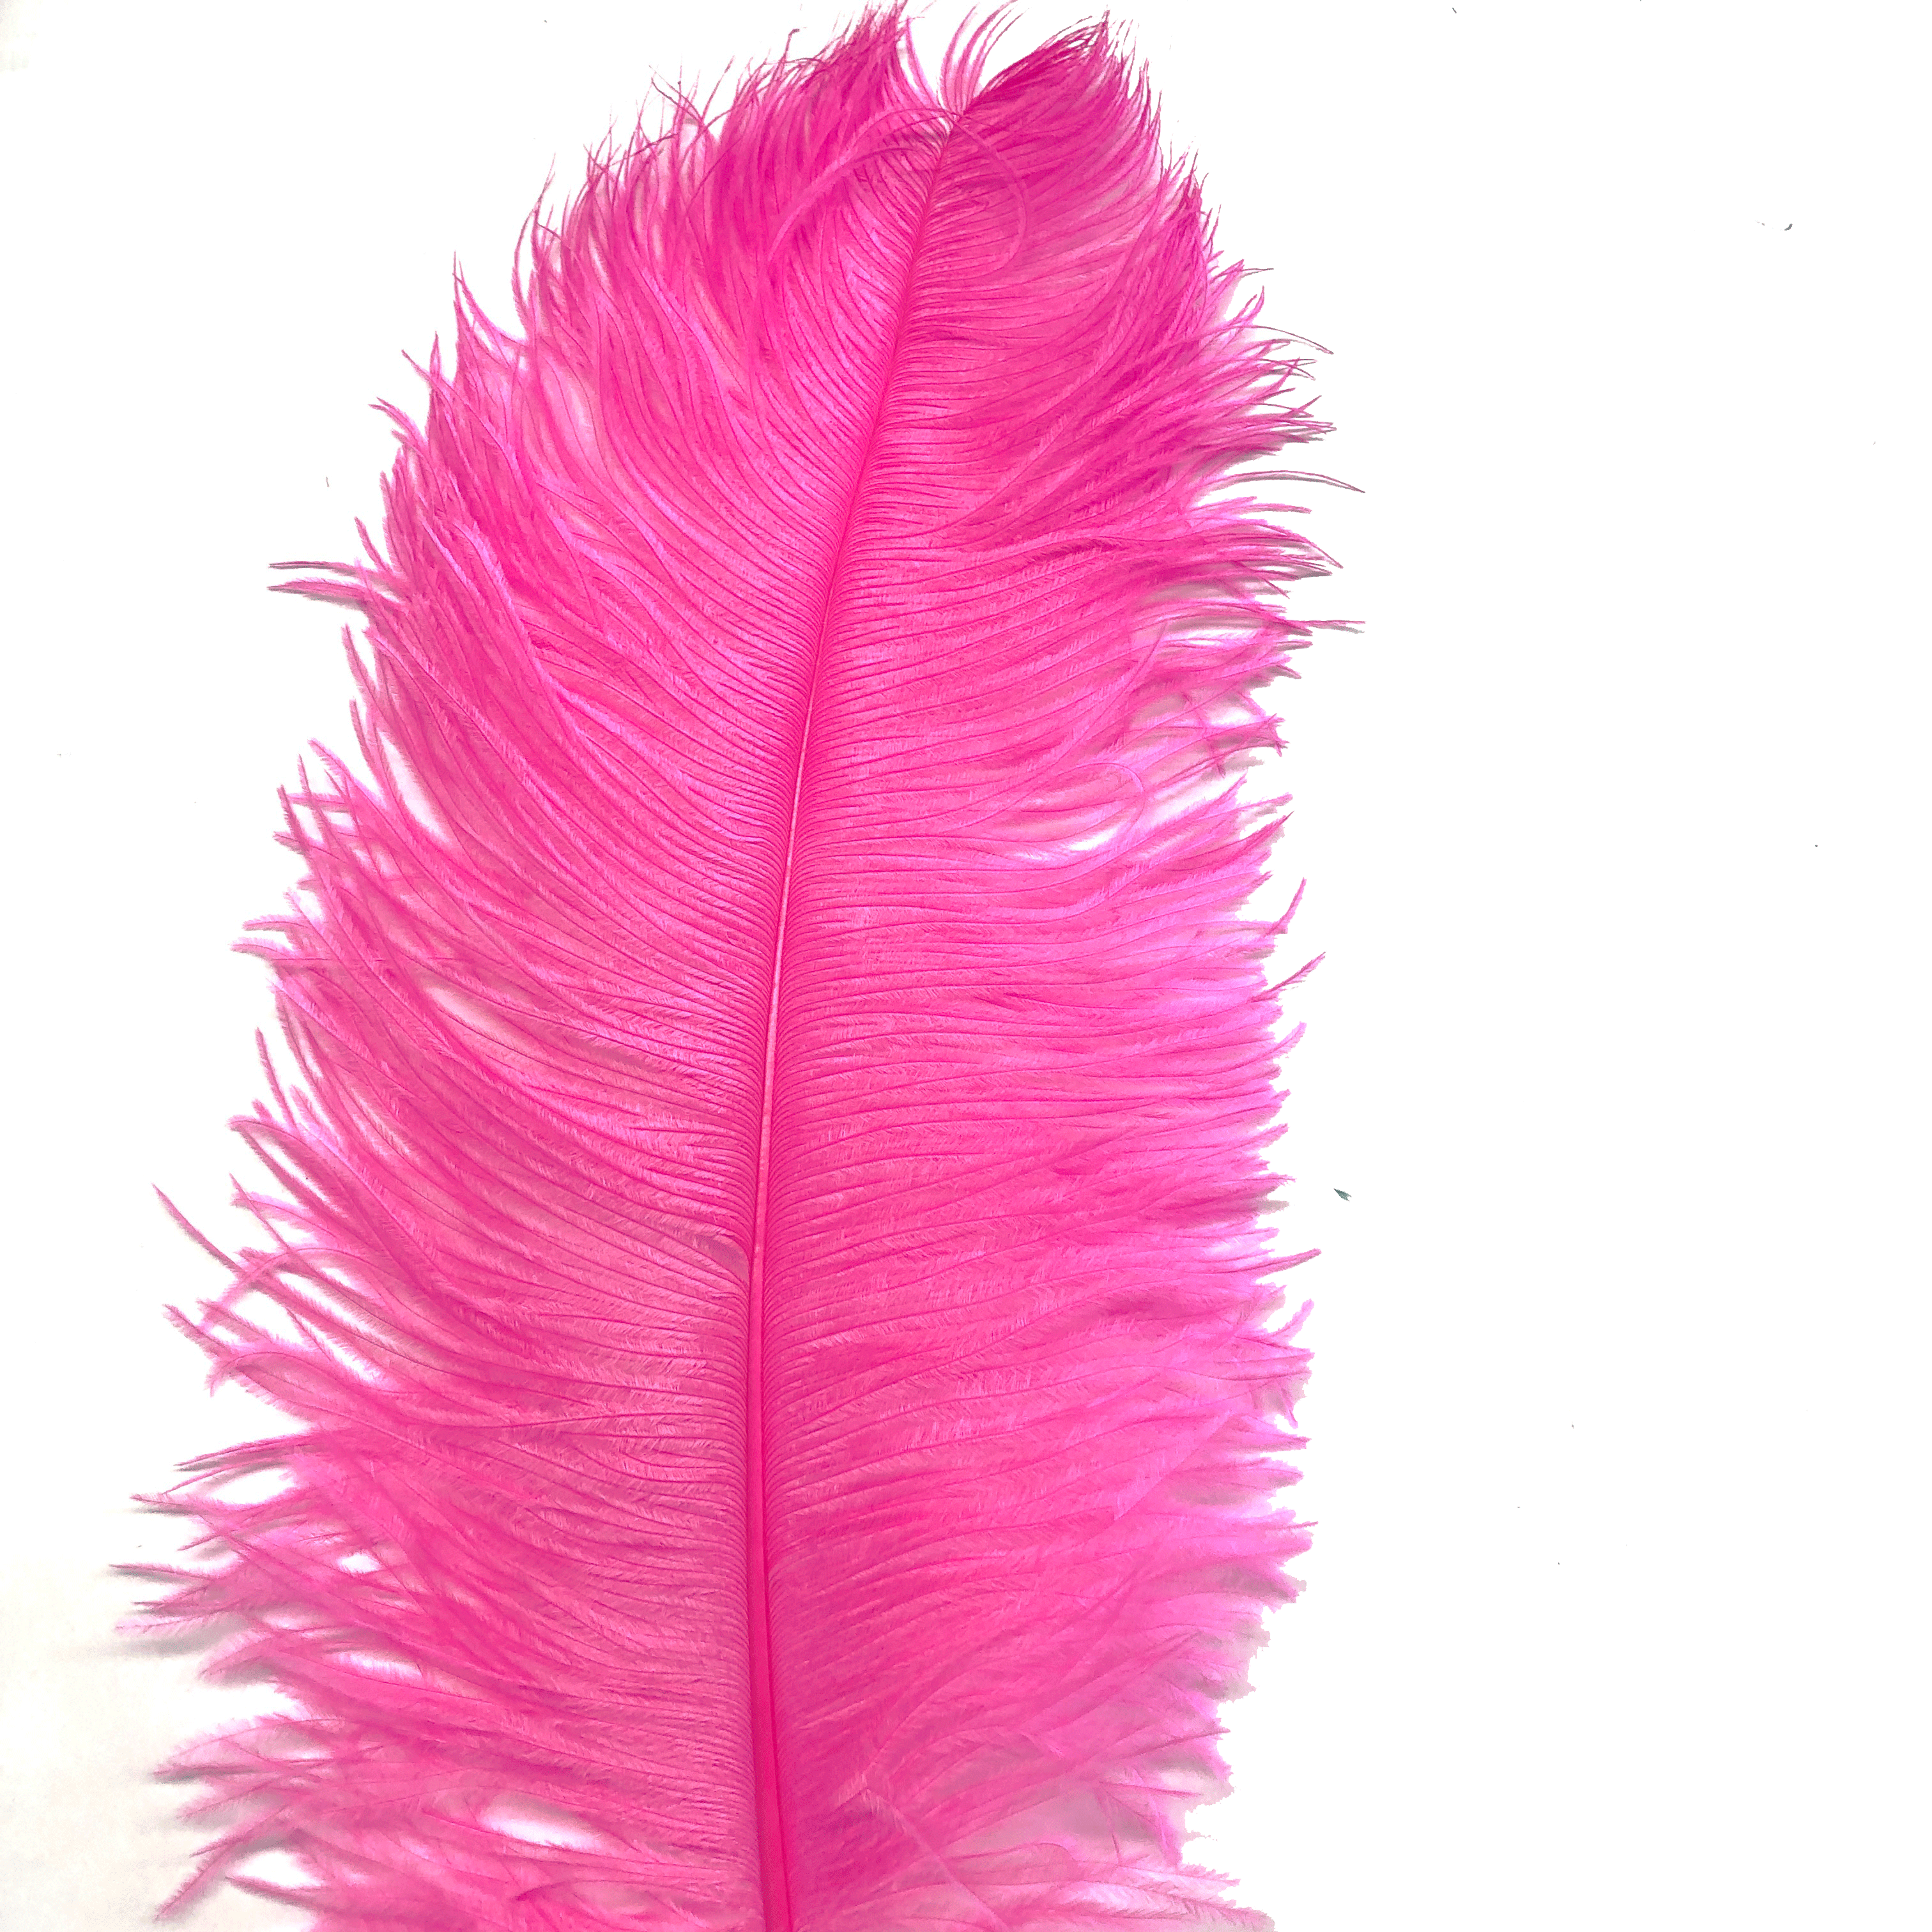 Ostrich Wing Feather Plumes 60-65cm (24-26") - Hot Pink ((SECONDS))